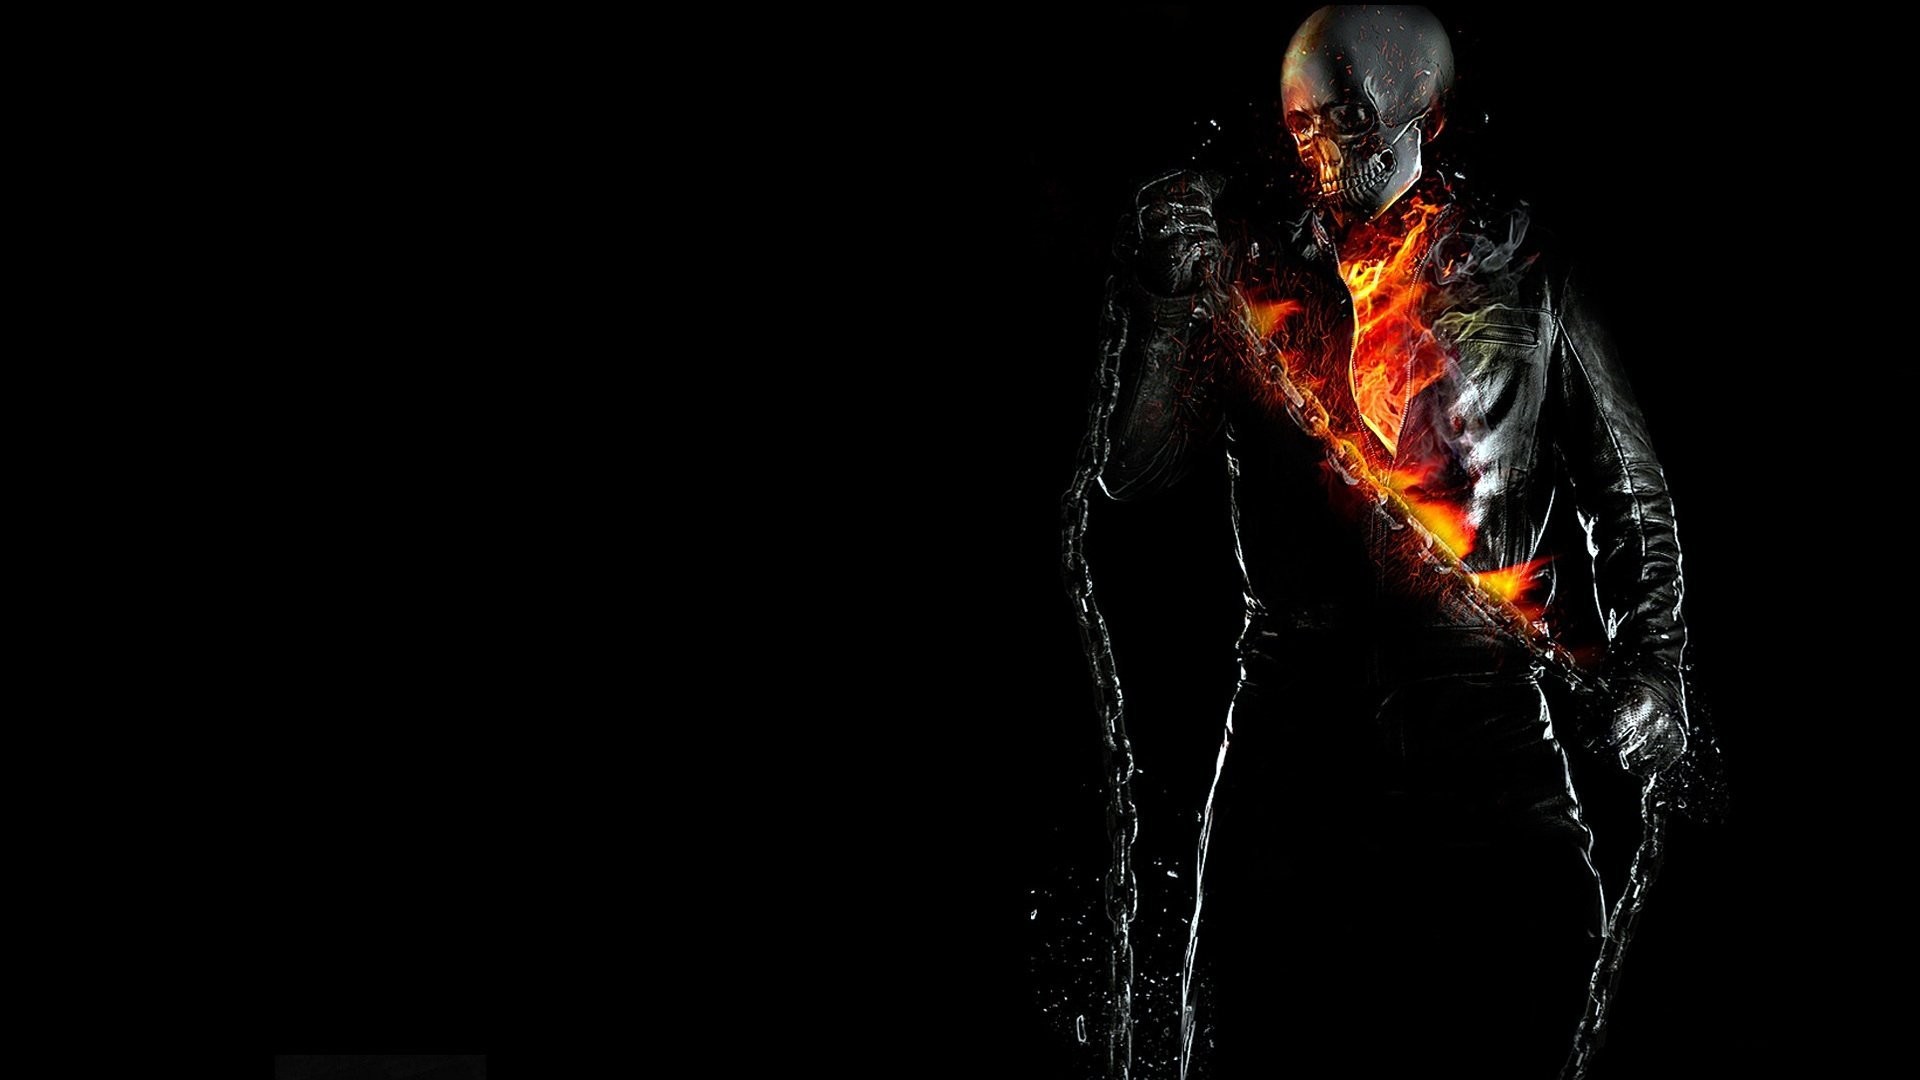 Background skeleton circuit fire flame ghost rider ghost rider